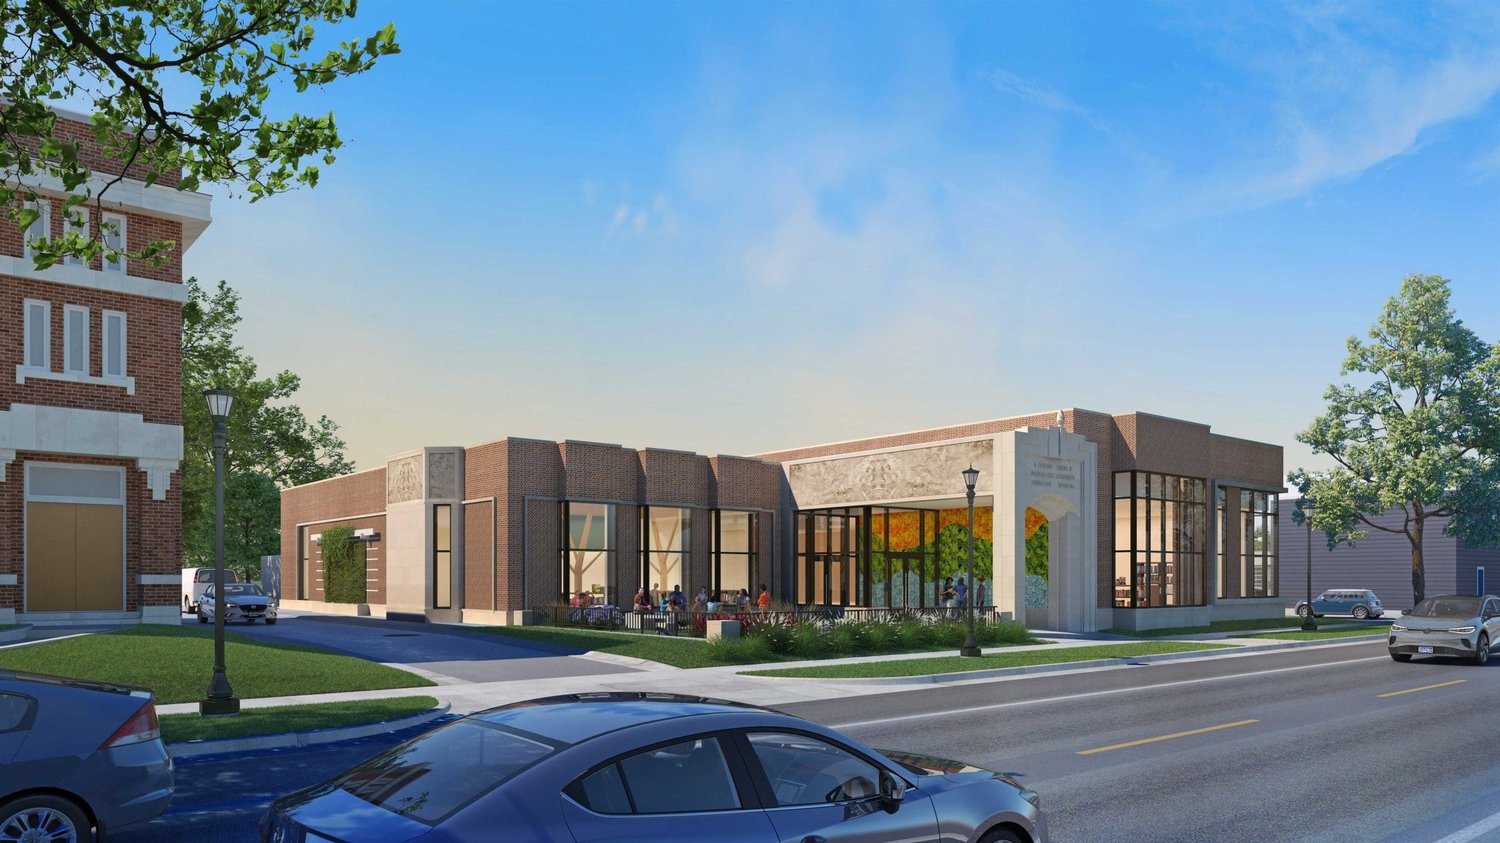 The city plans to demolish the historic Hamline Midway Library and build a new one, as shown by this rendering.